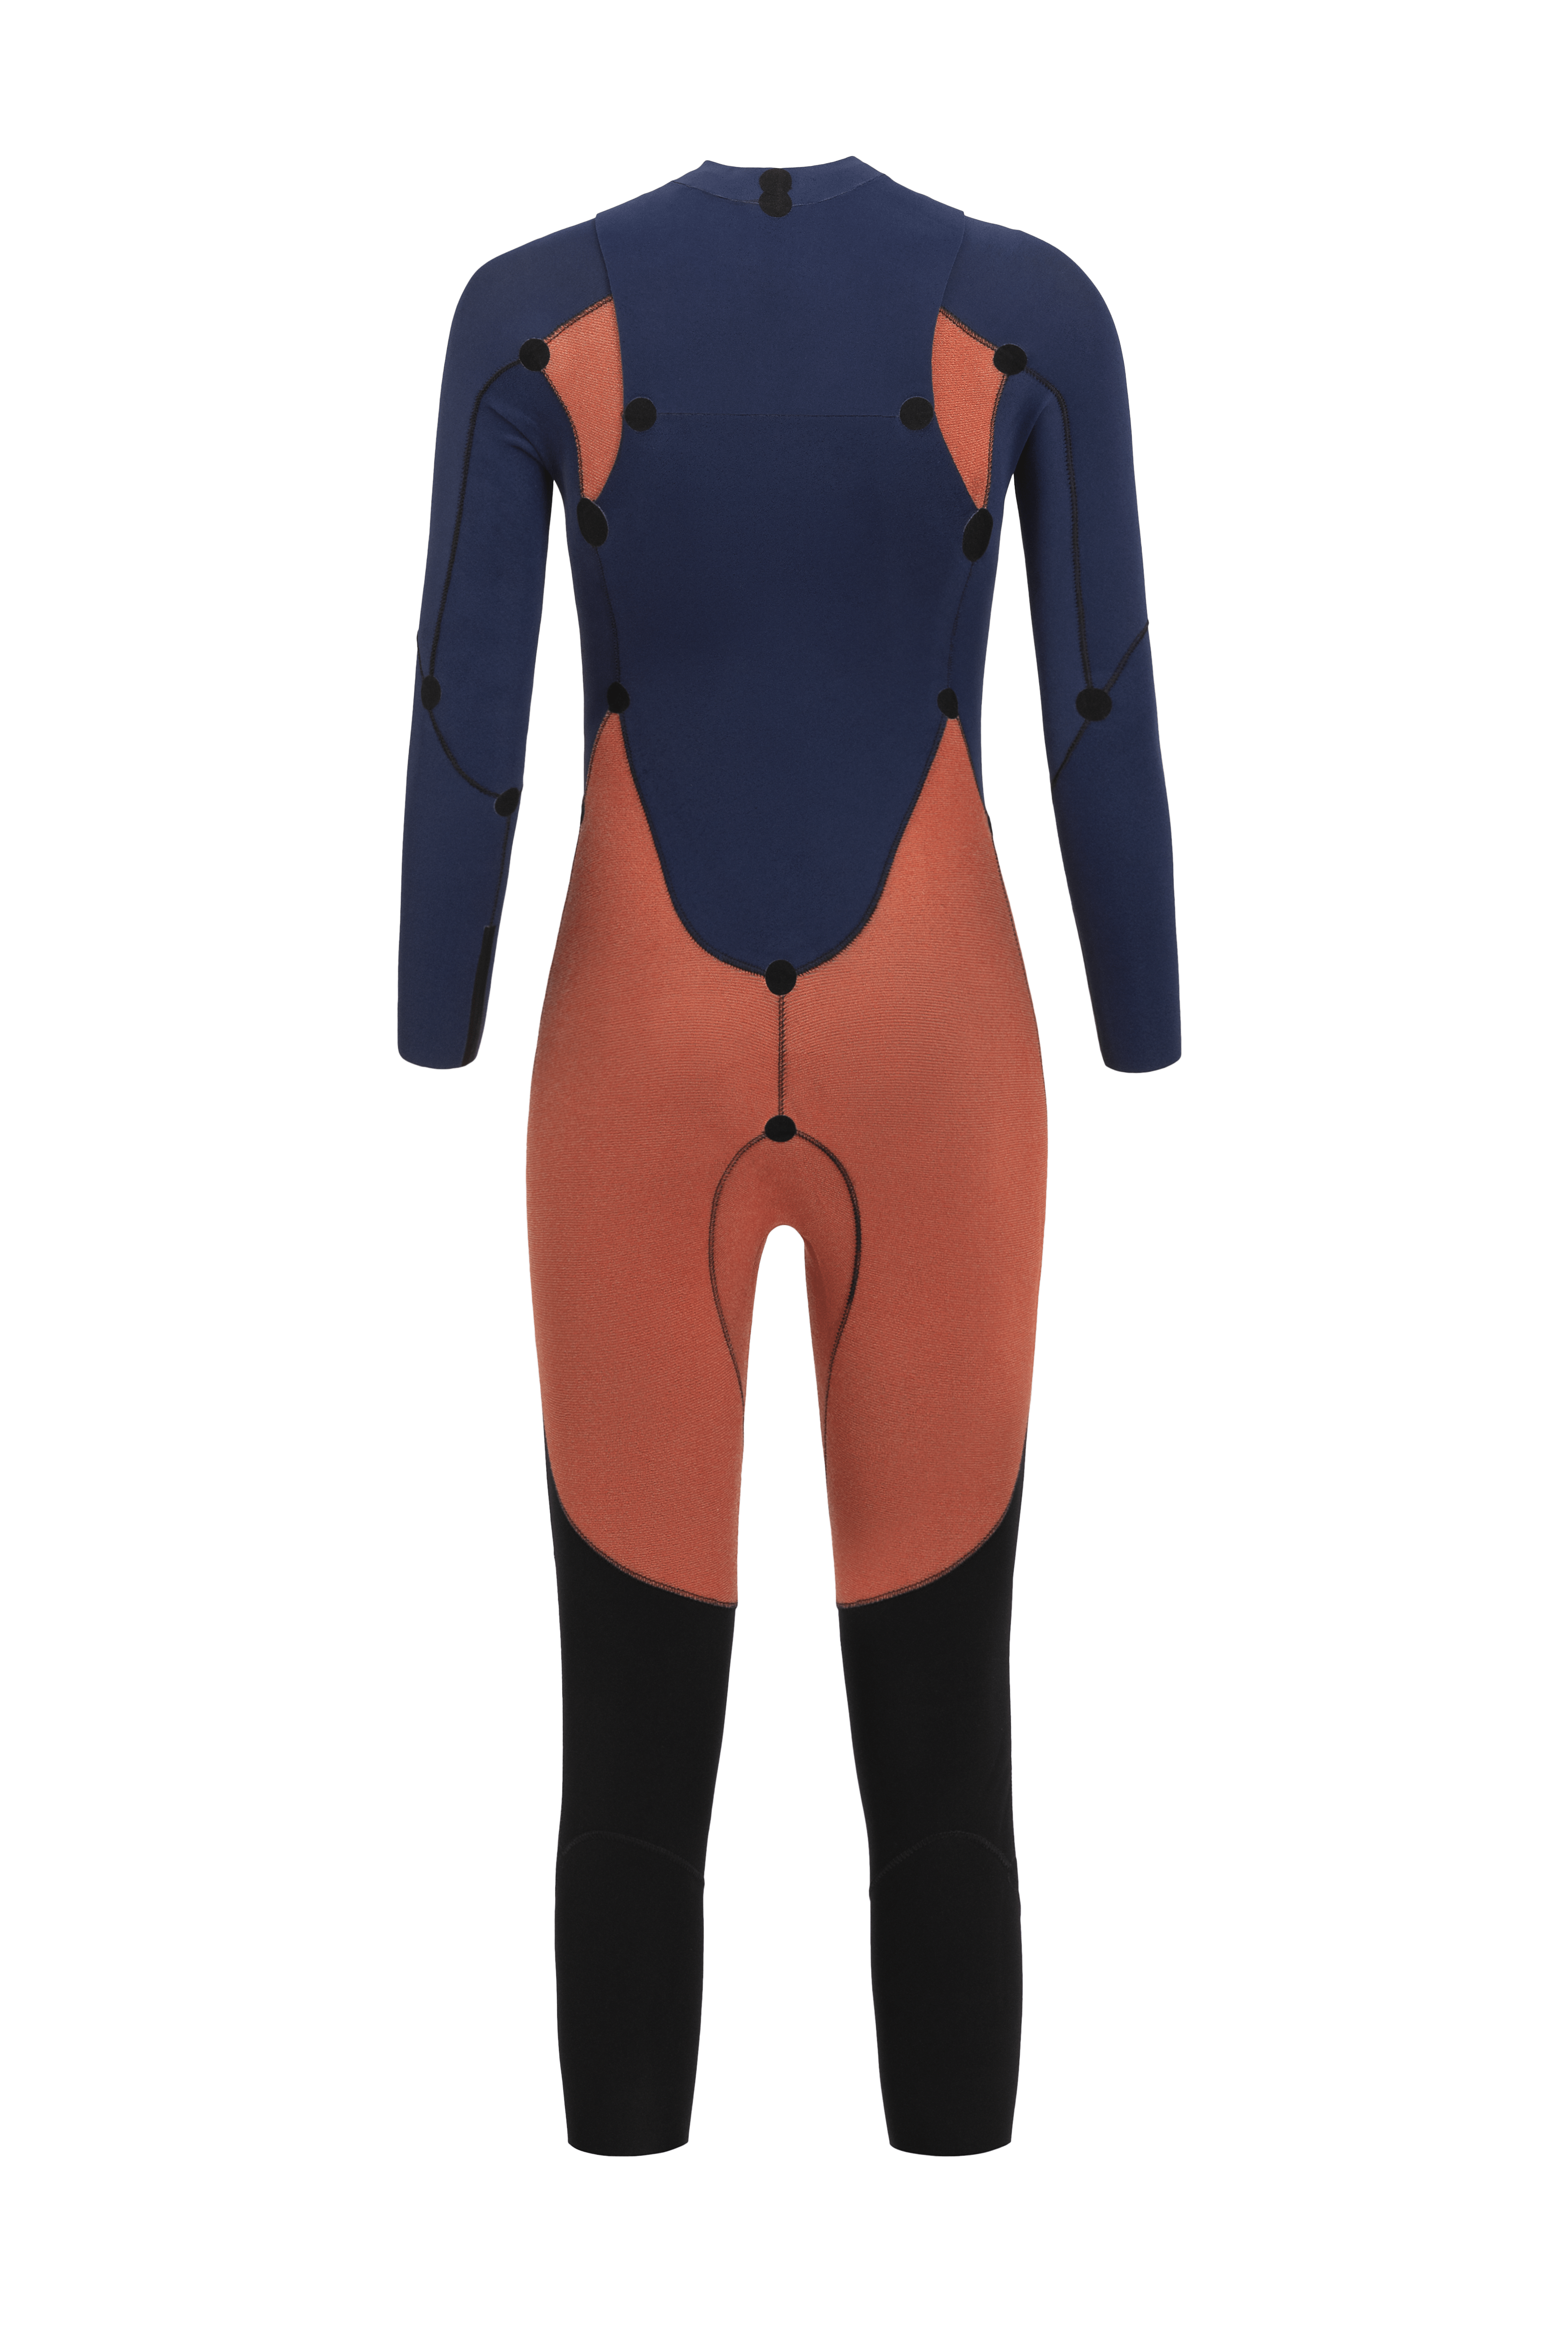 orca Ocean Swimming Openwater RS1 Thermal Womens Wetsuit